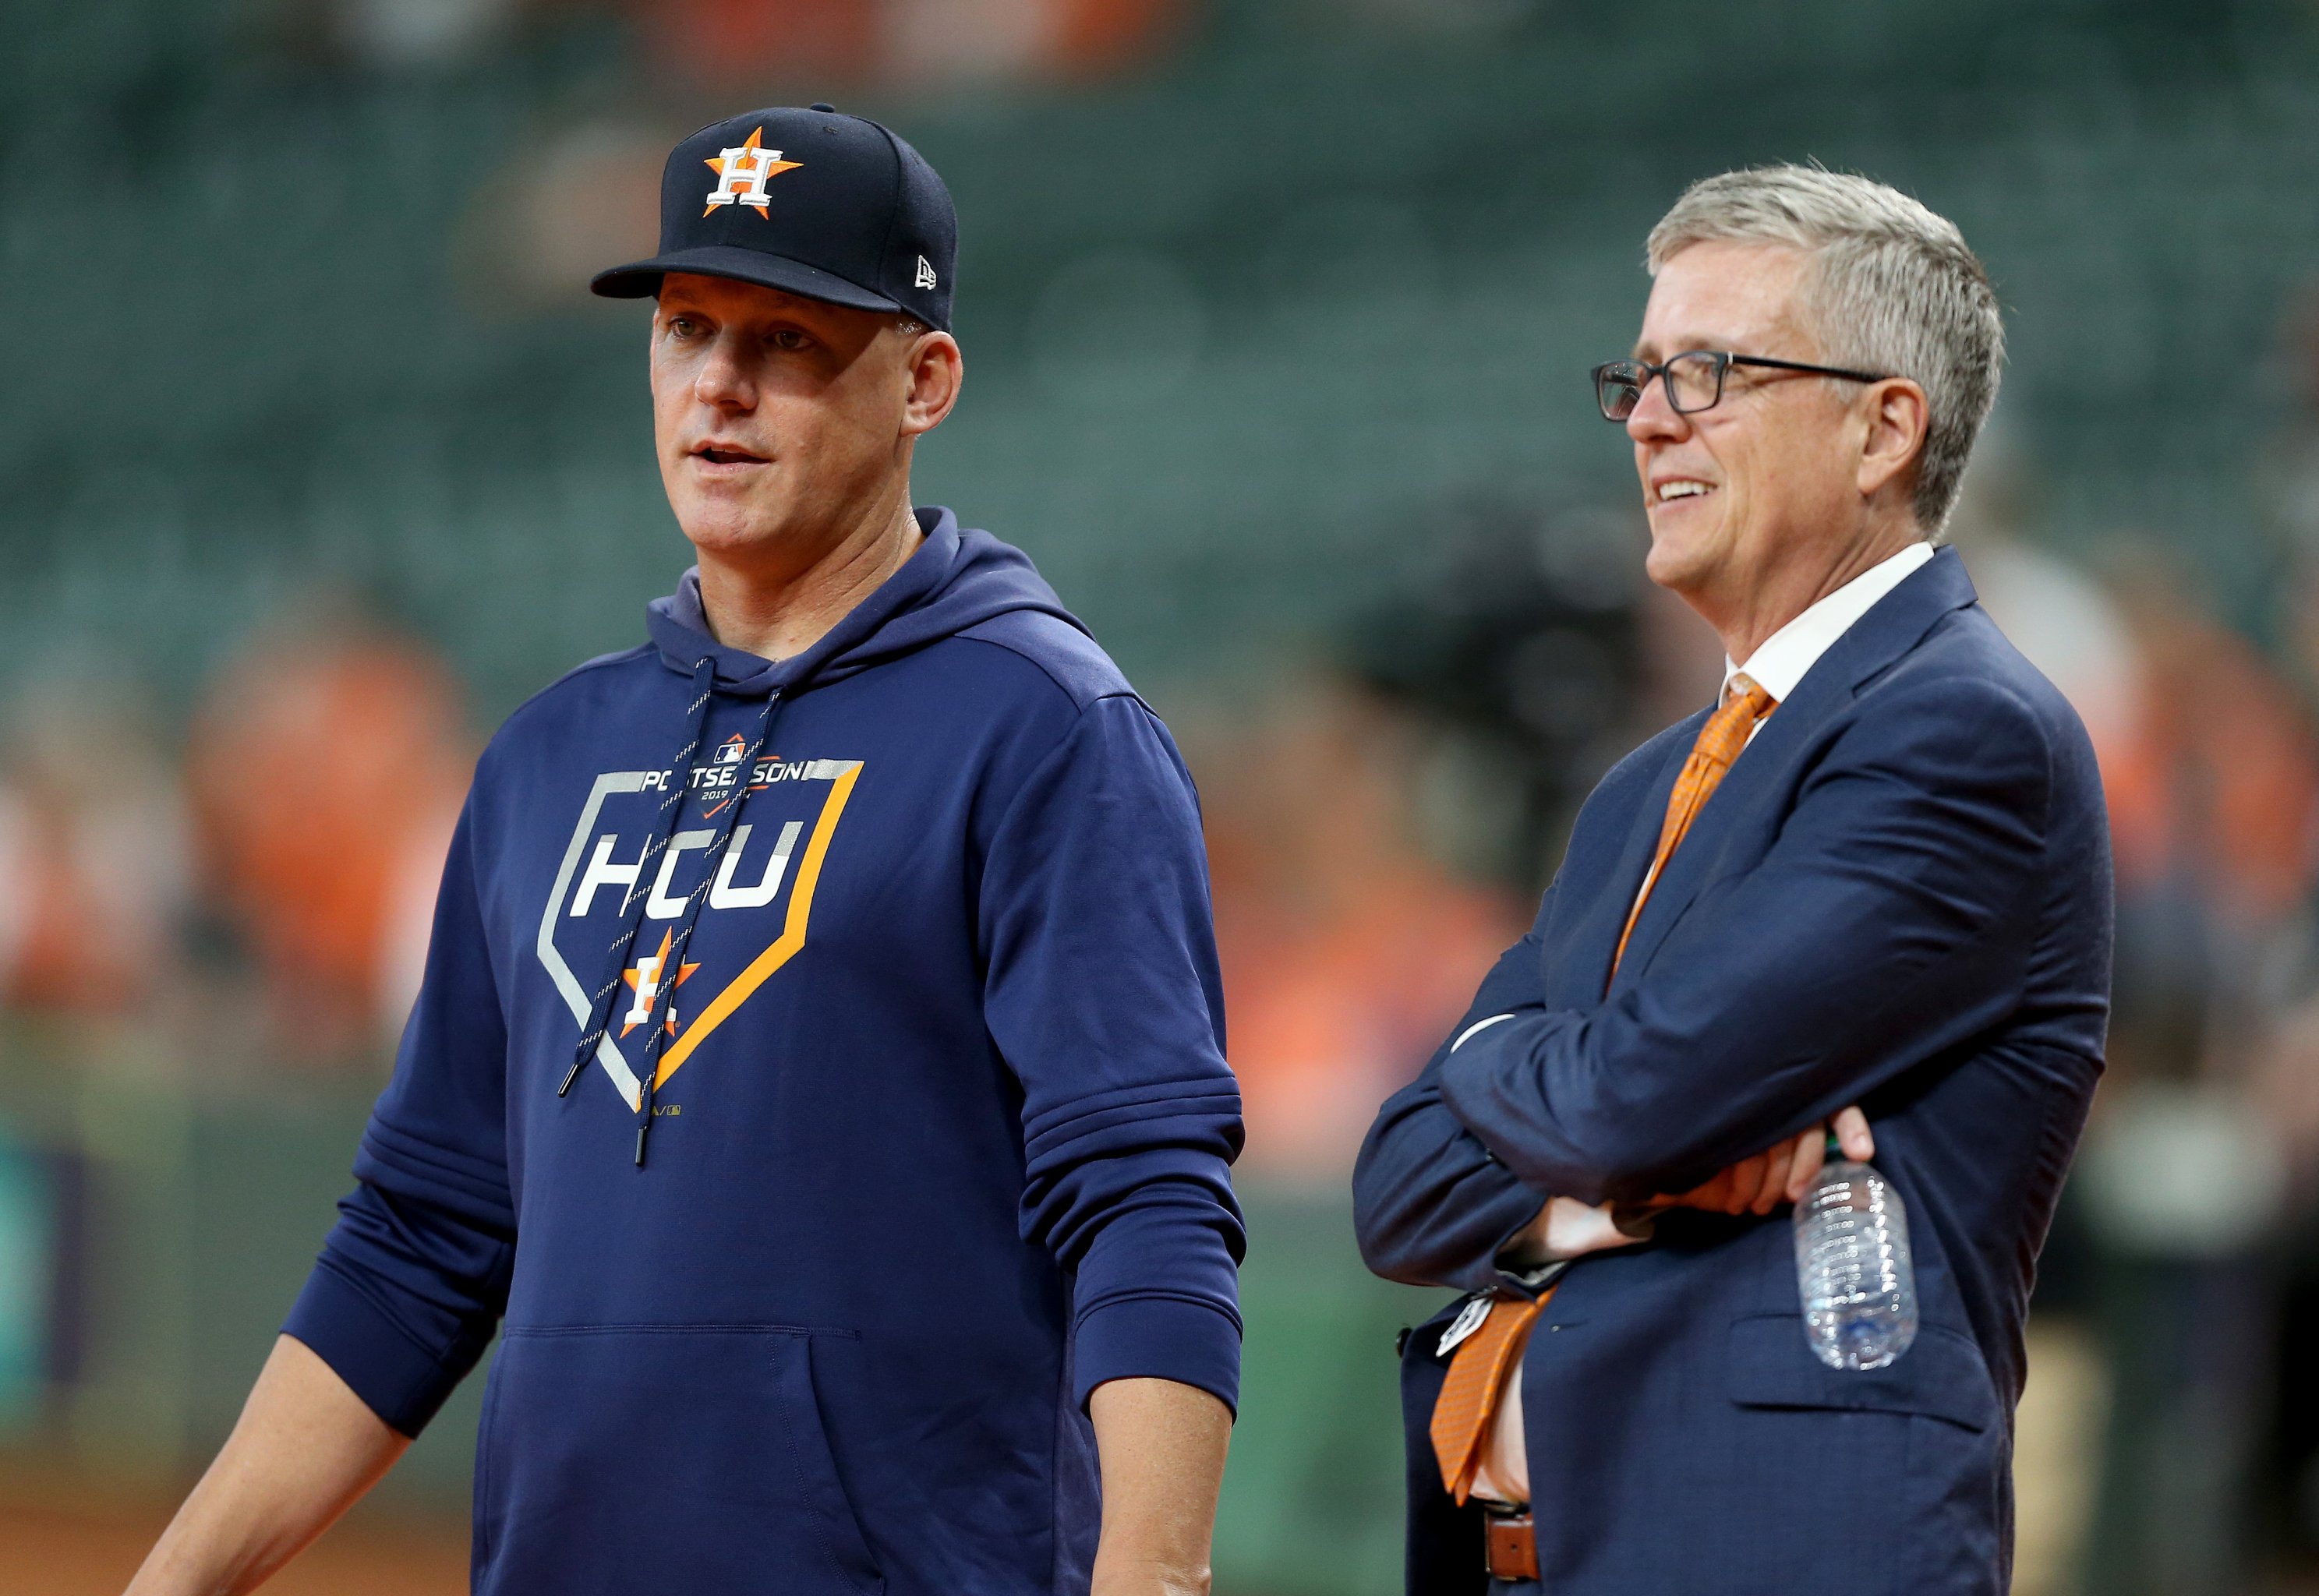 Astros cheating scandal brings down another manager as Carlos Beltran parts  ways with Mets